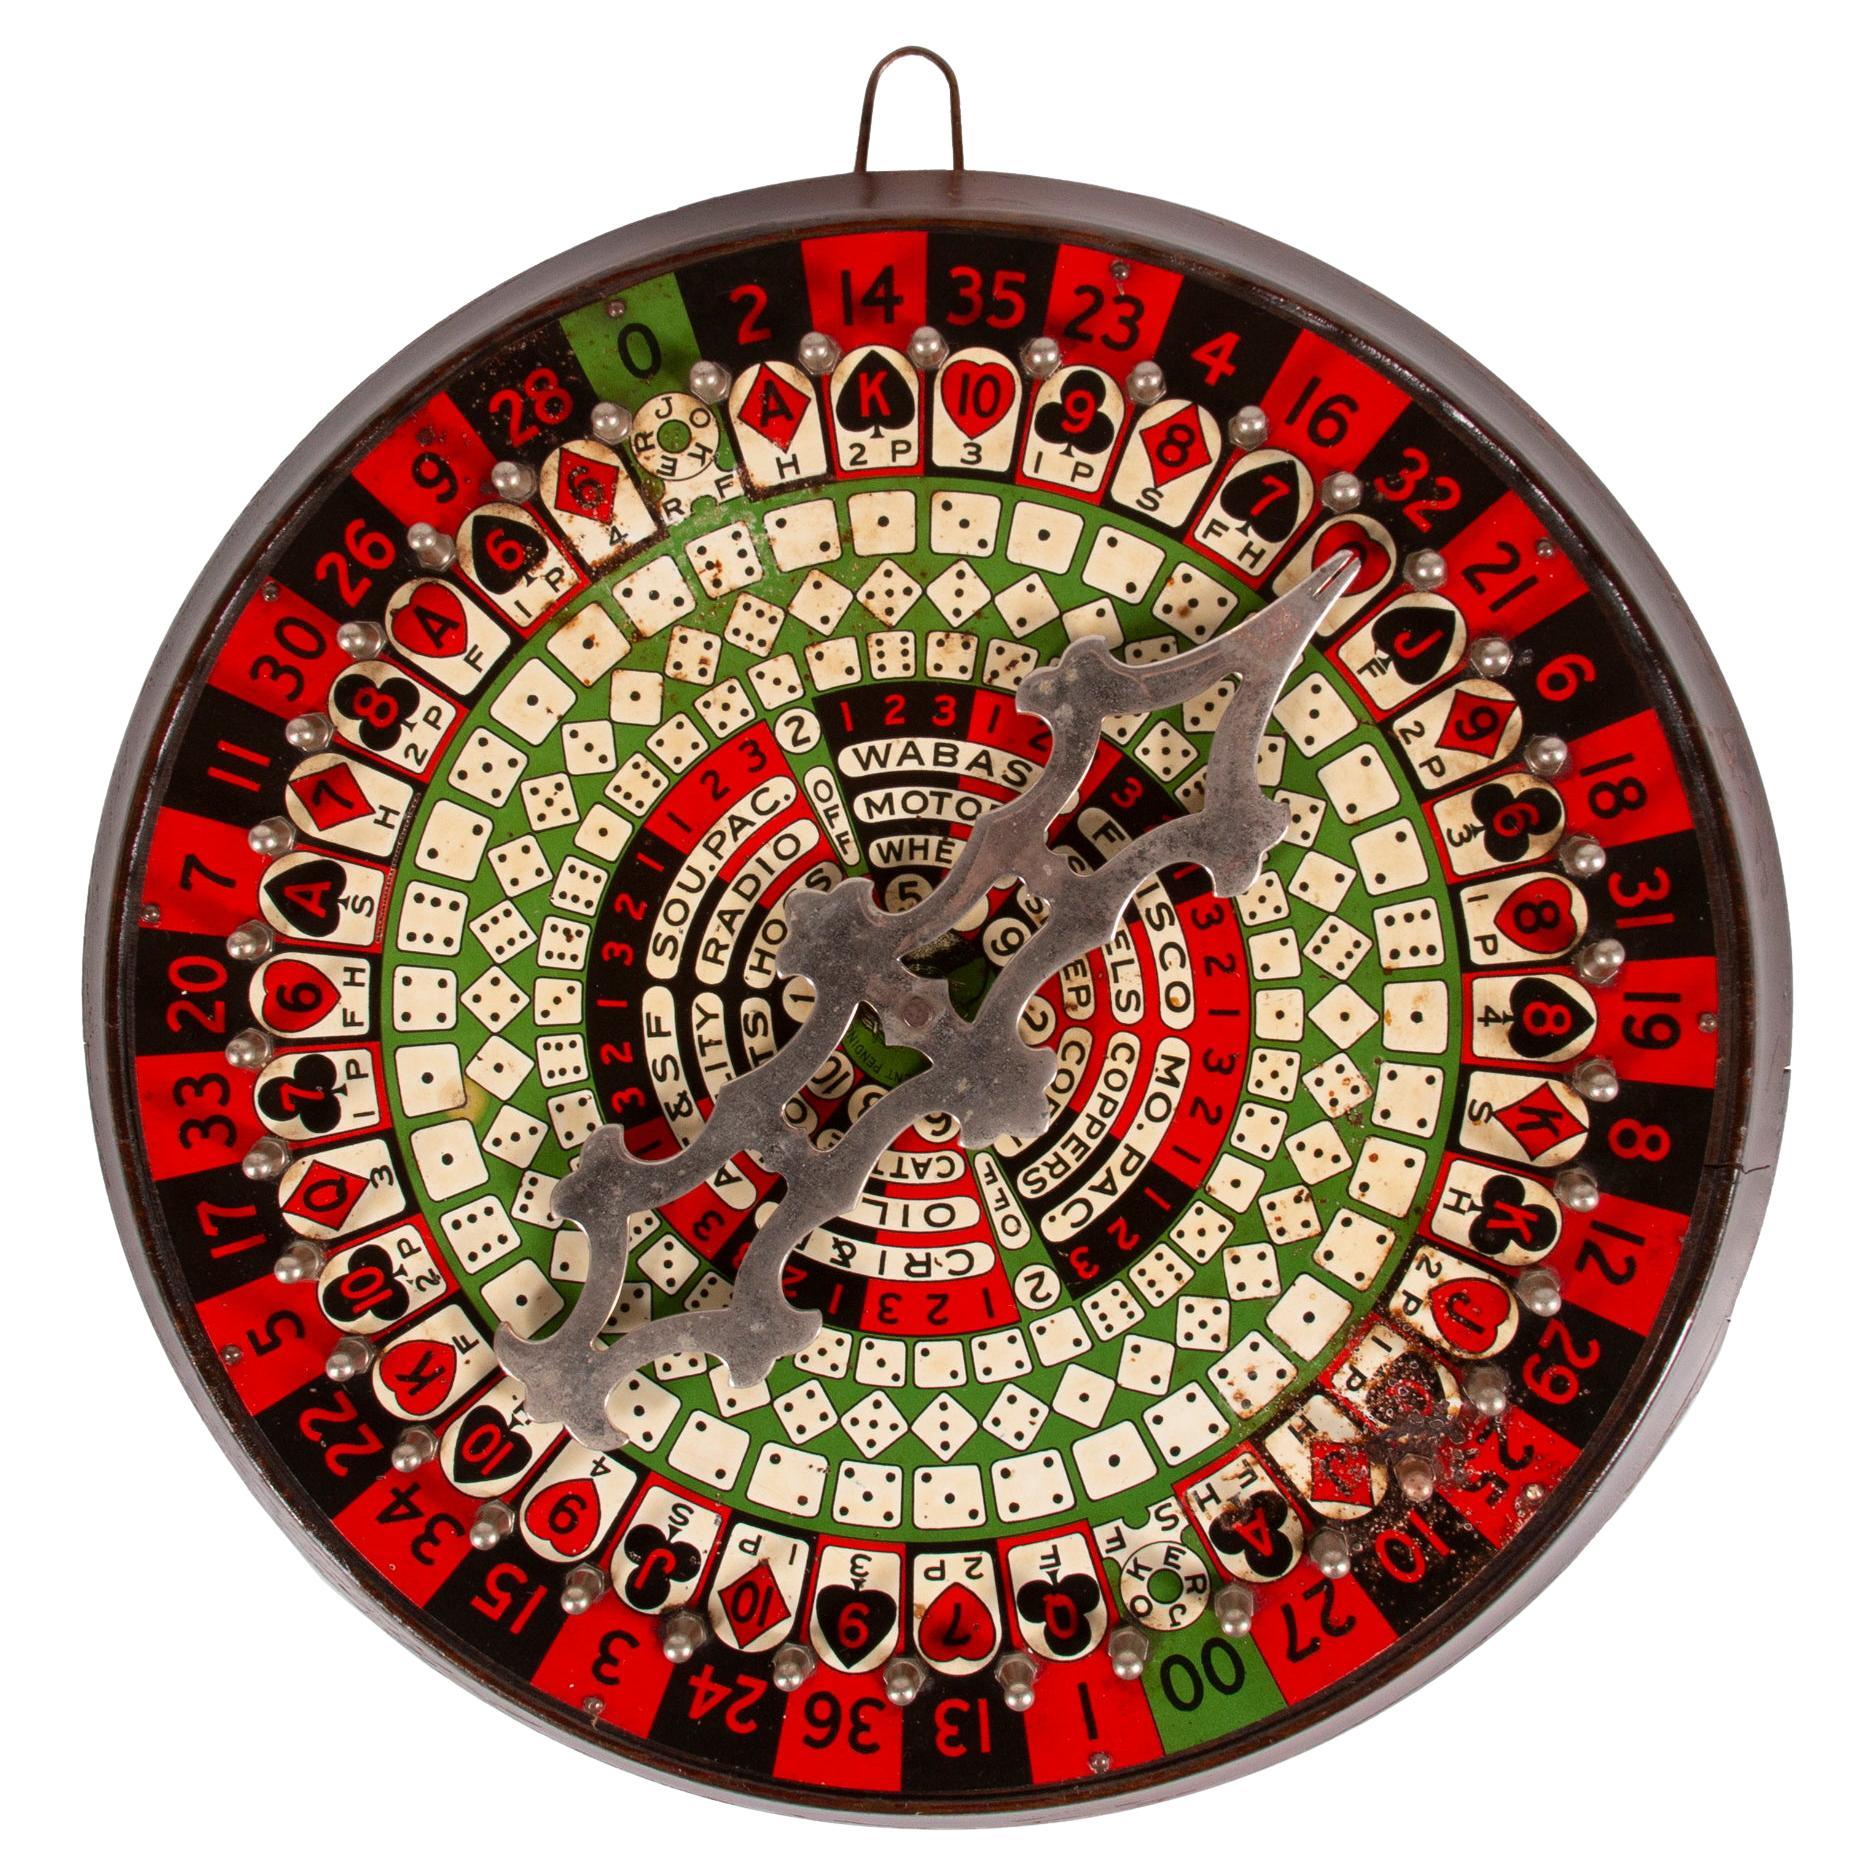 Colorful Painted Sheet Metal Game Wheel ca 1890-1910 For Sale